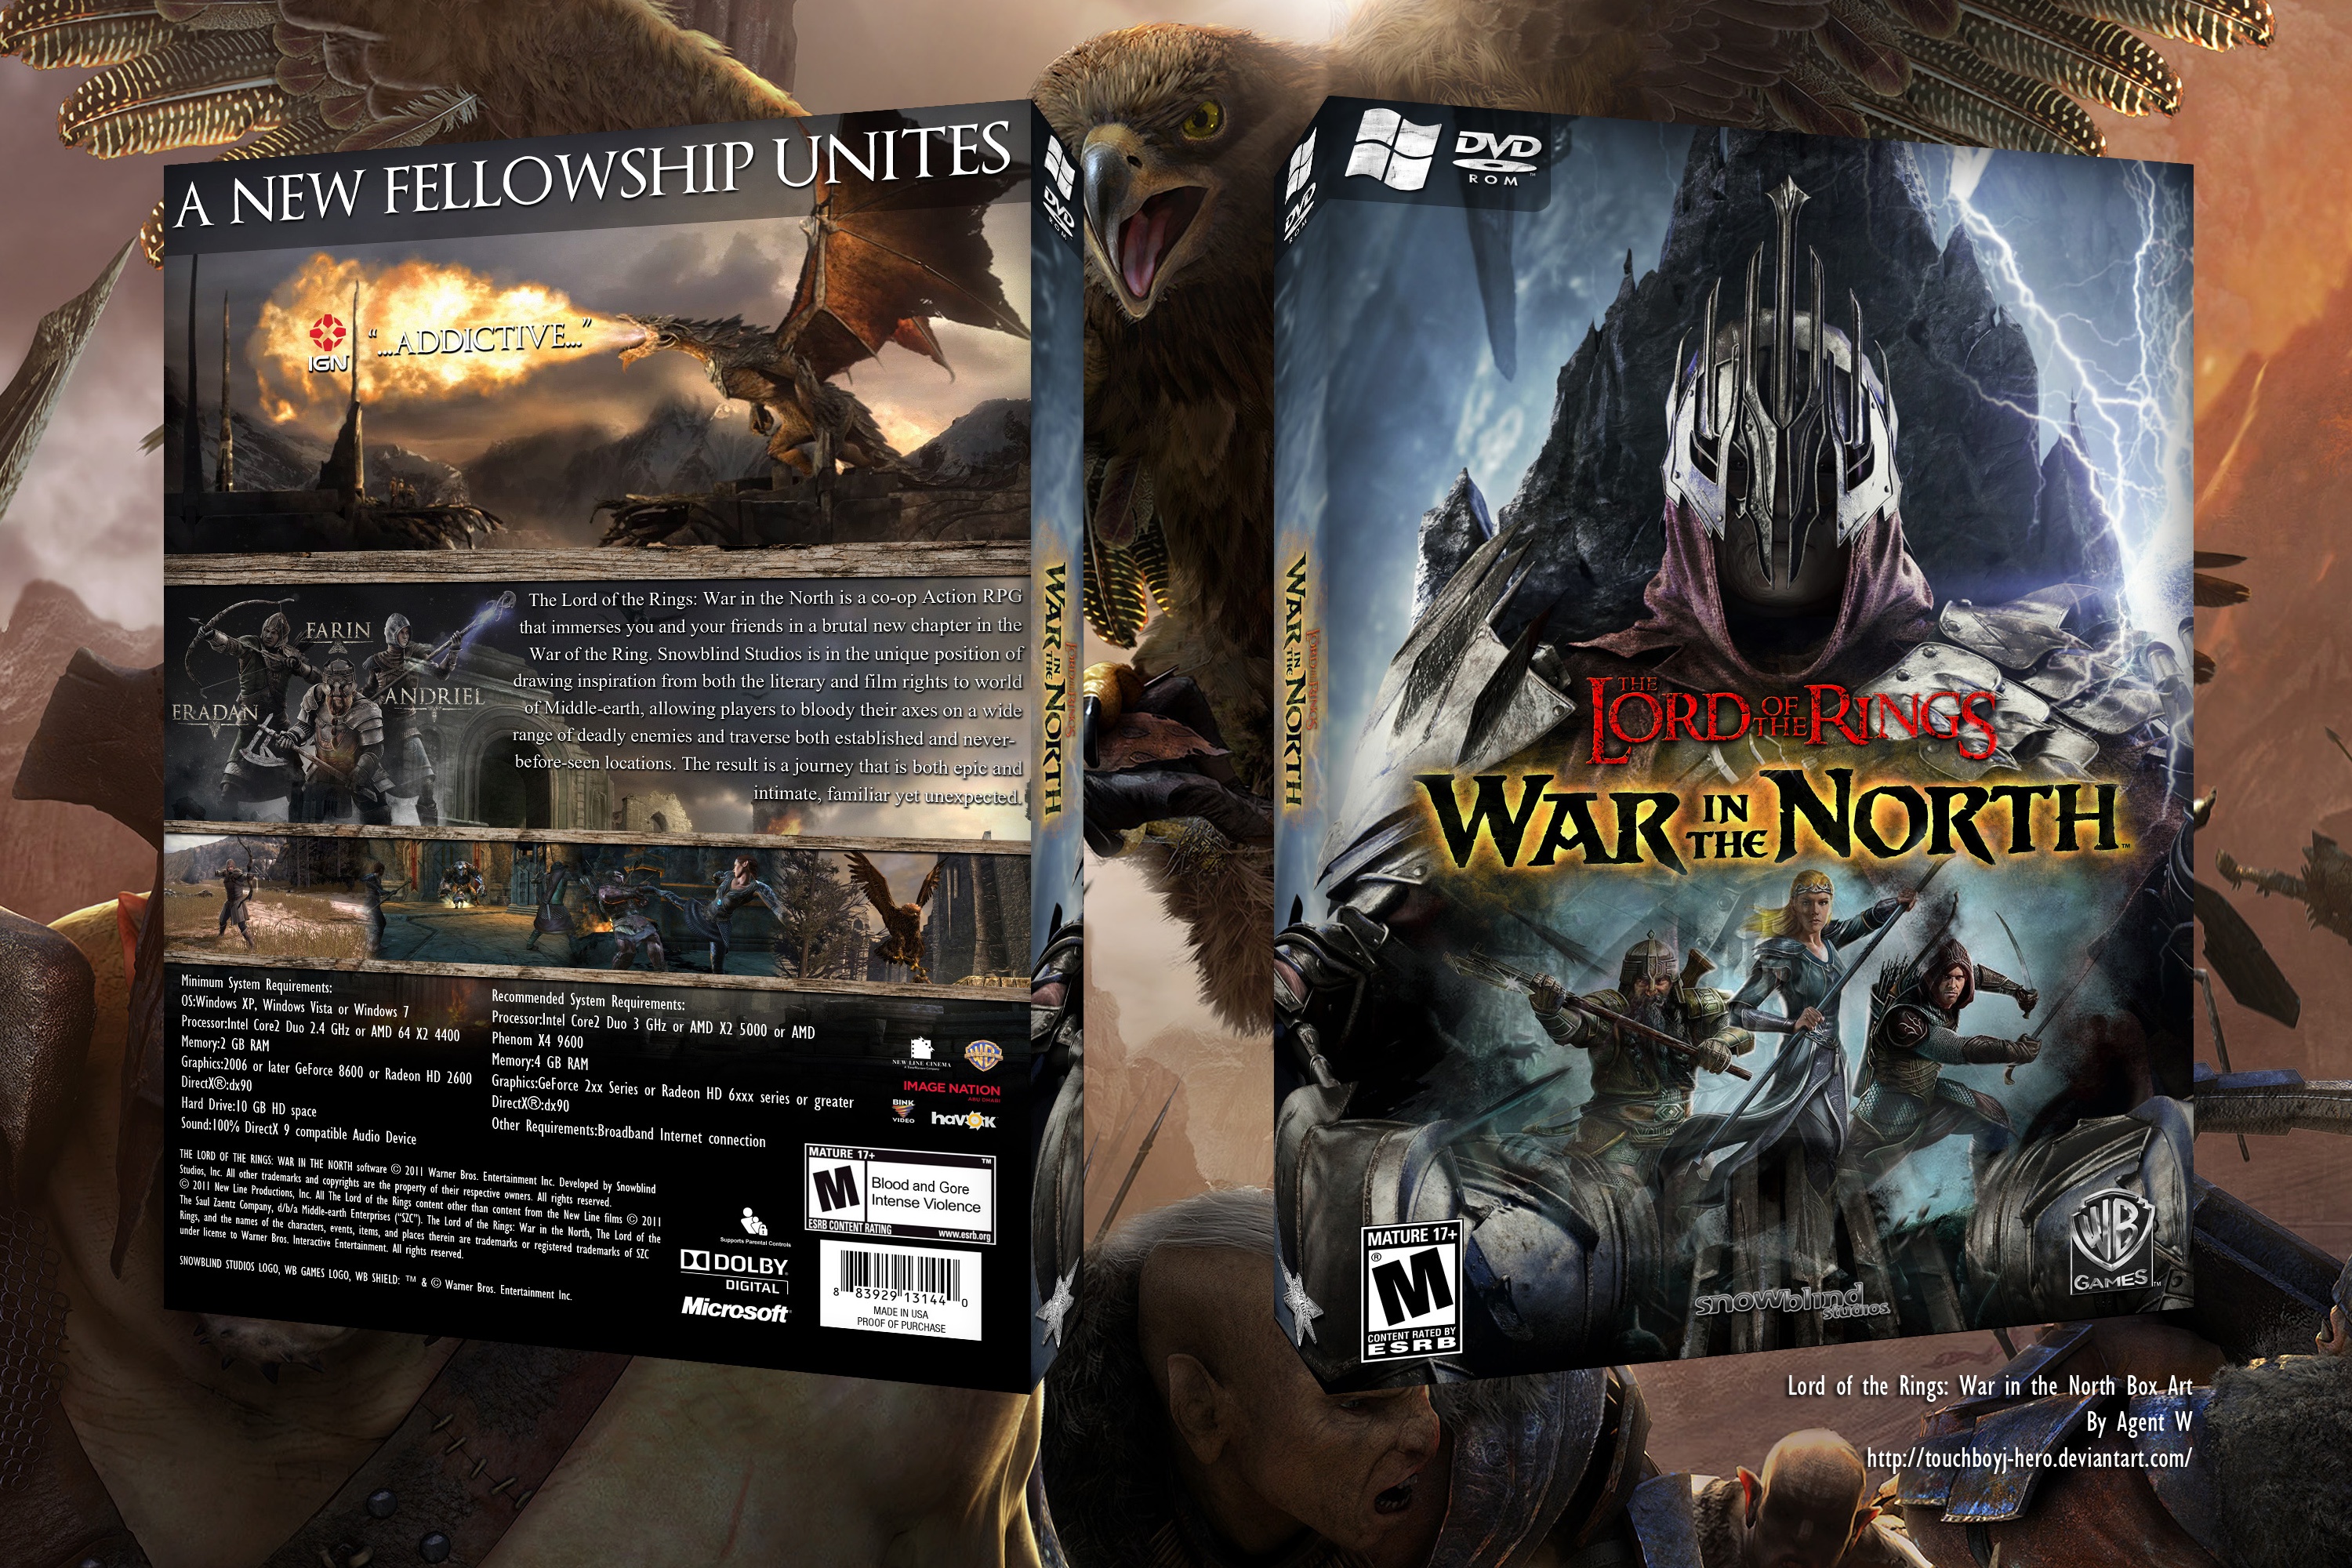 Lord of the Rings: War in the North box cover